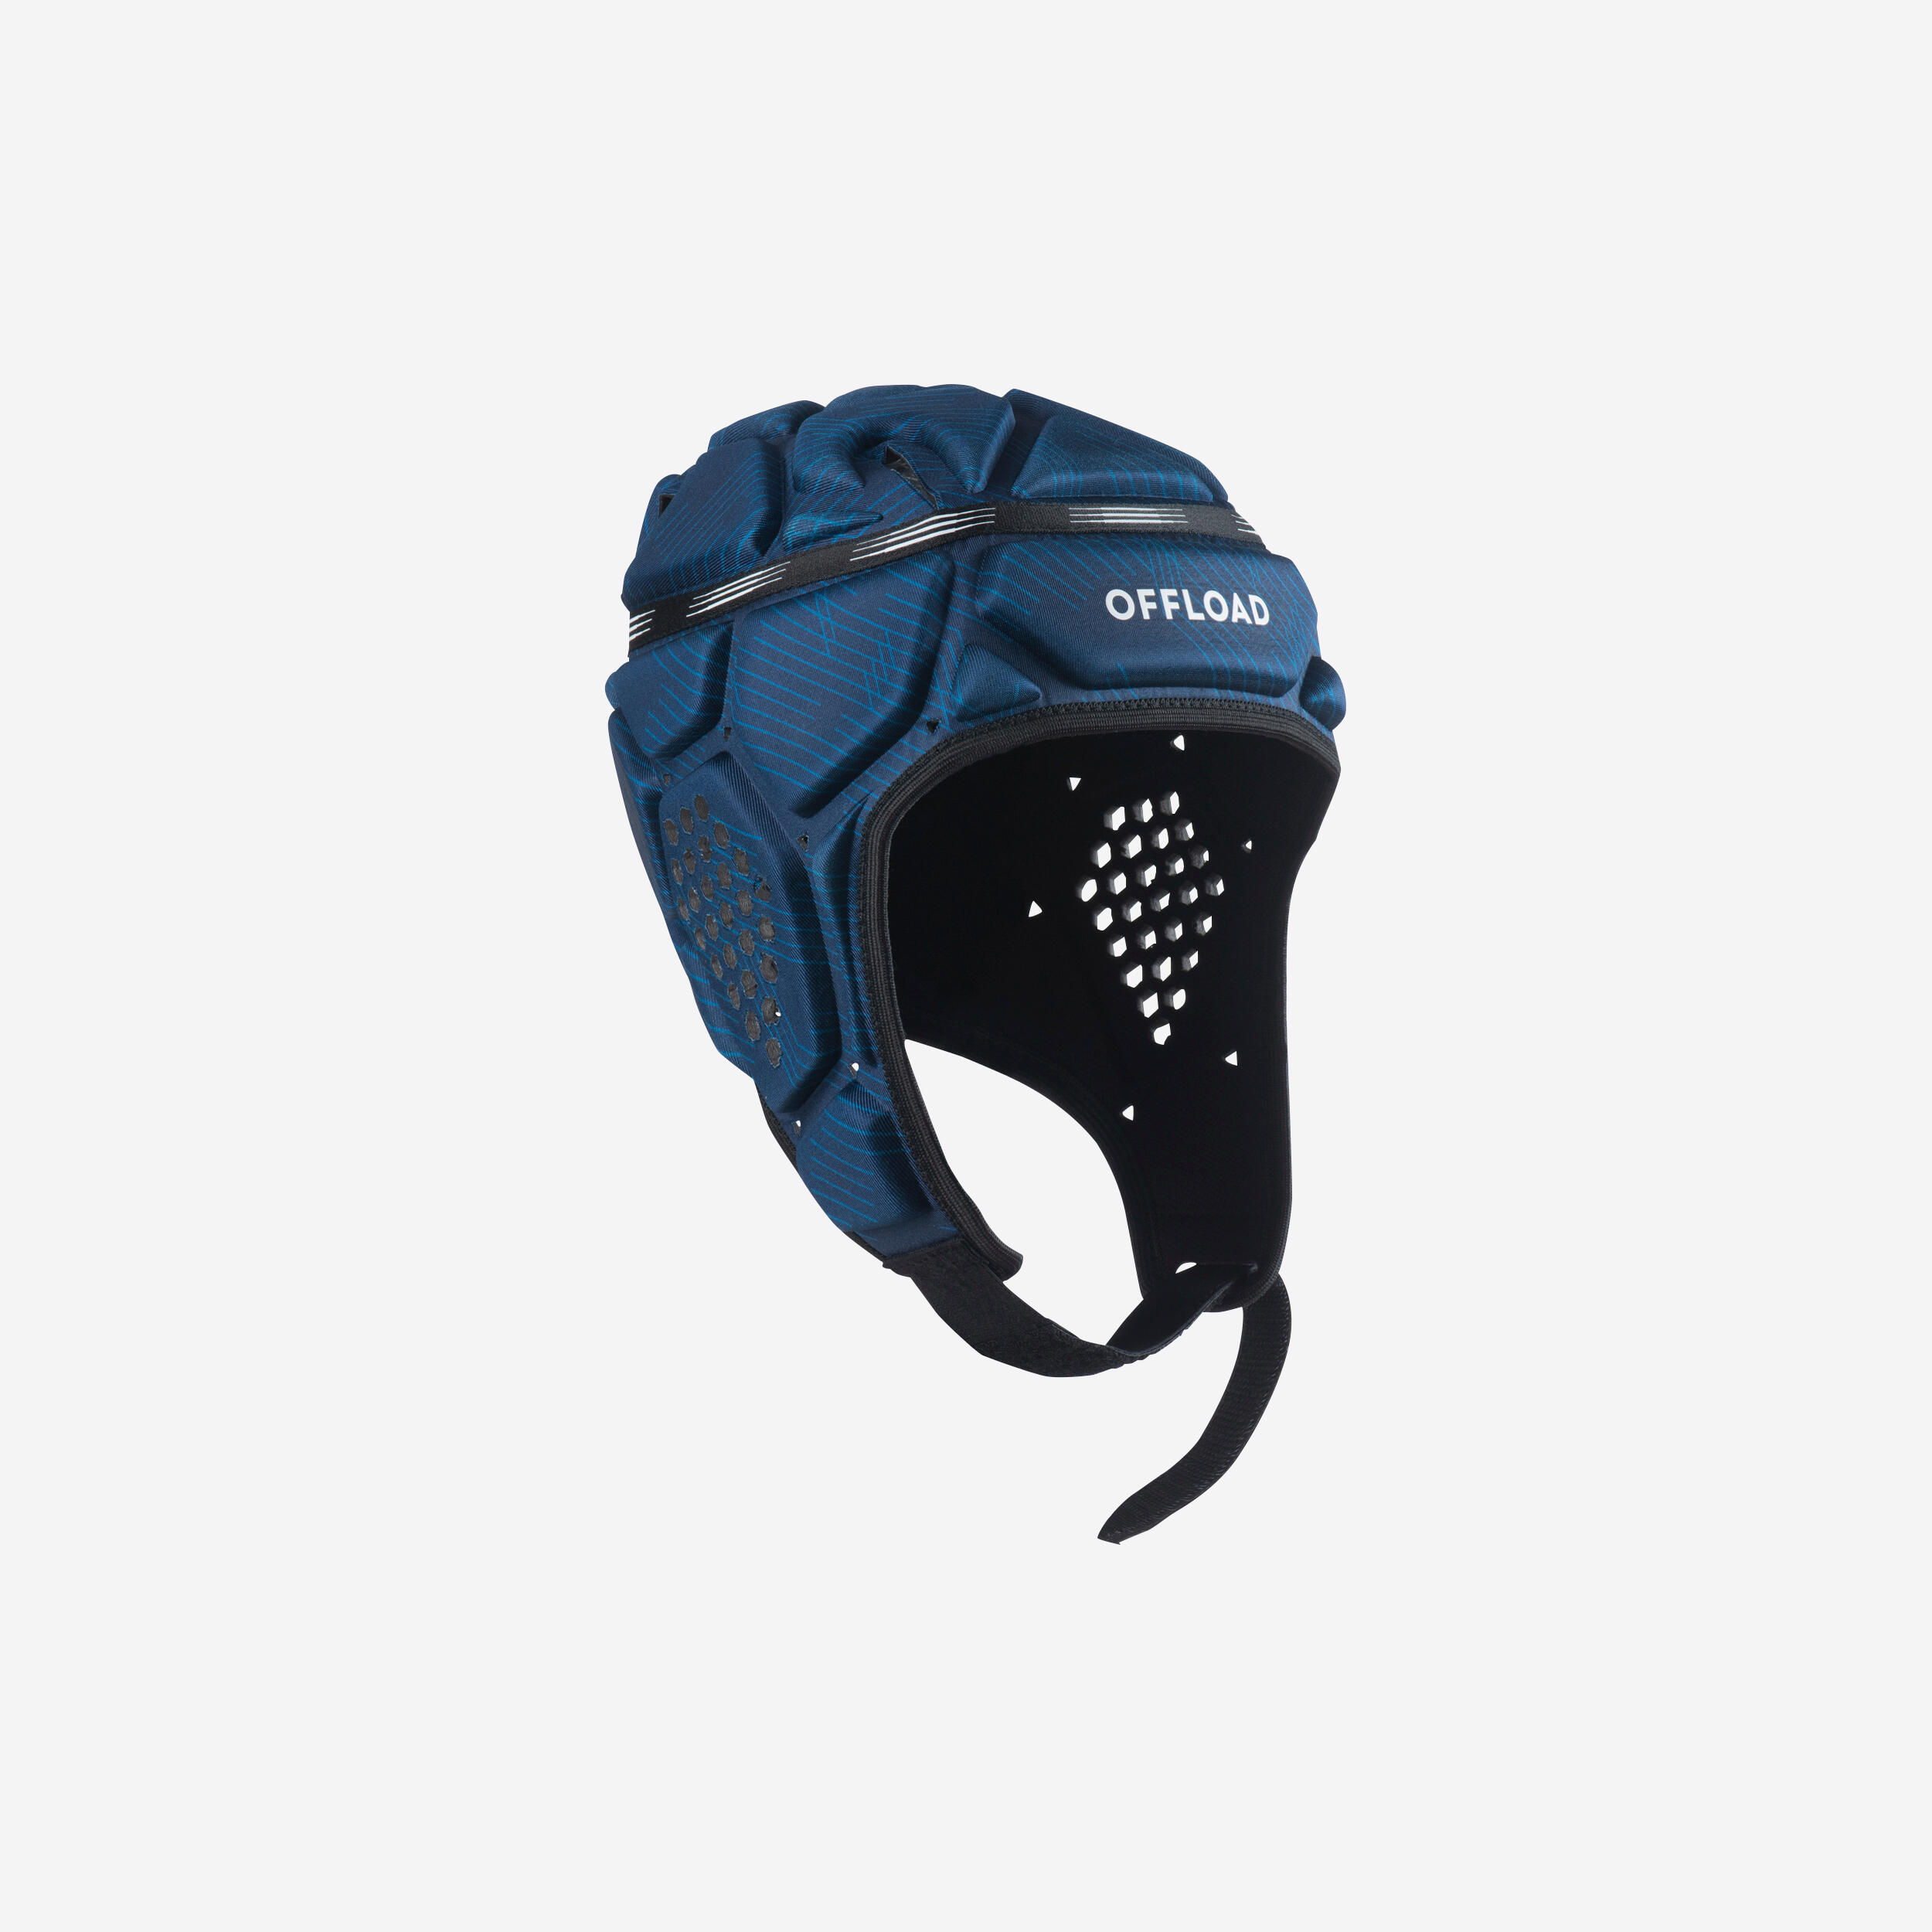 OFFLOAD Kids'/Adult Rugby Head Guard R500 - Blue